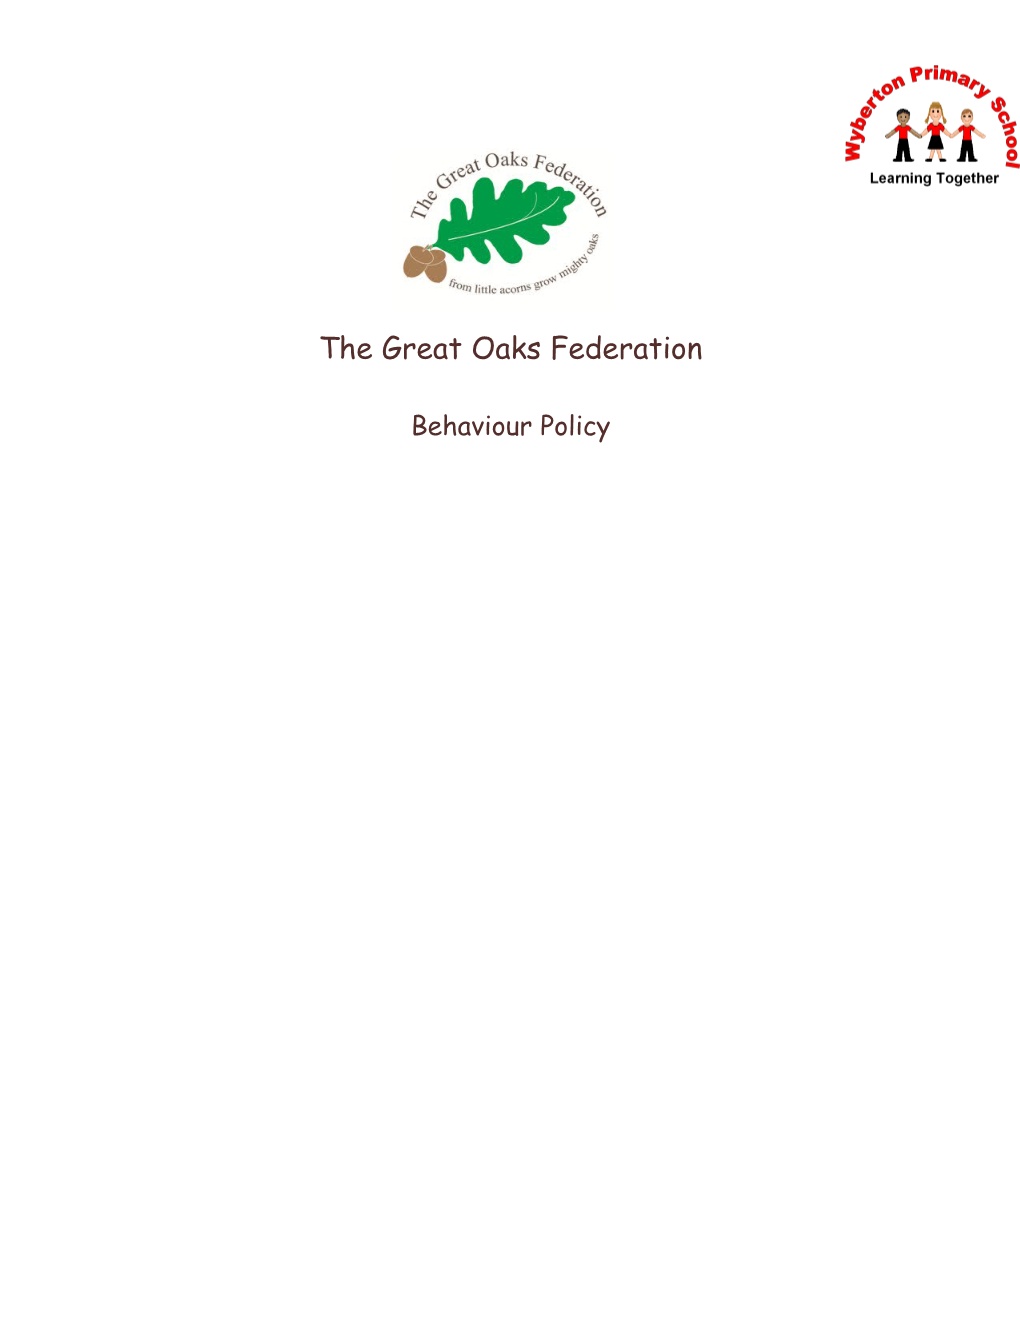 The Great Oaks Federation